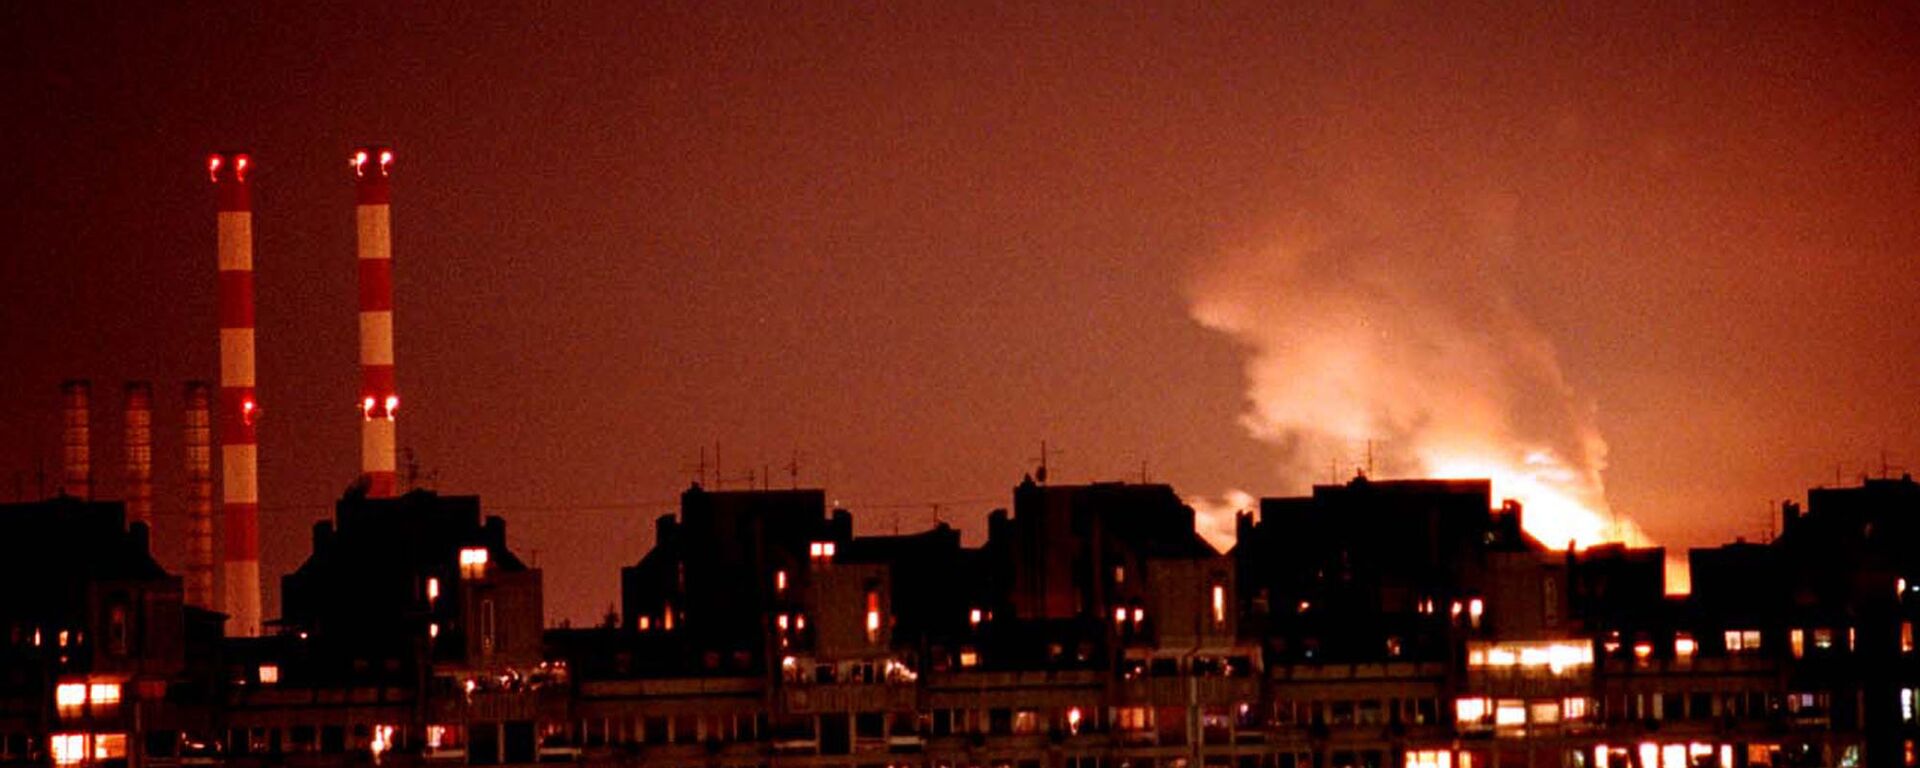 Flames from an explosion light up the Belgrade skyline near a power station after NATO cruise missiles and warplanes attacked Yugoslavia late Wednesday, March 24, 1999 - Sputnik International, 1920, 30.08.2017